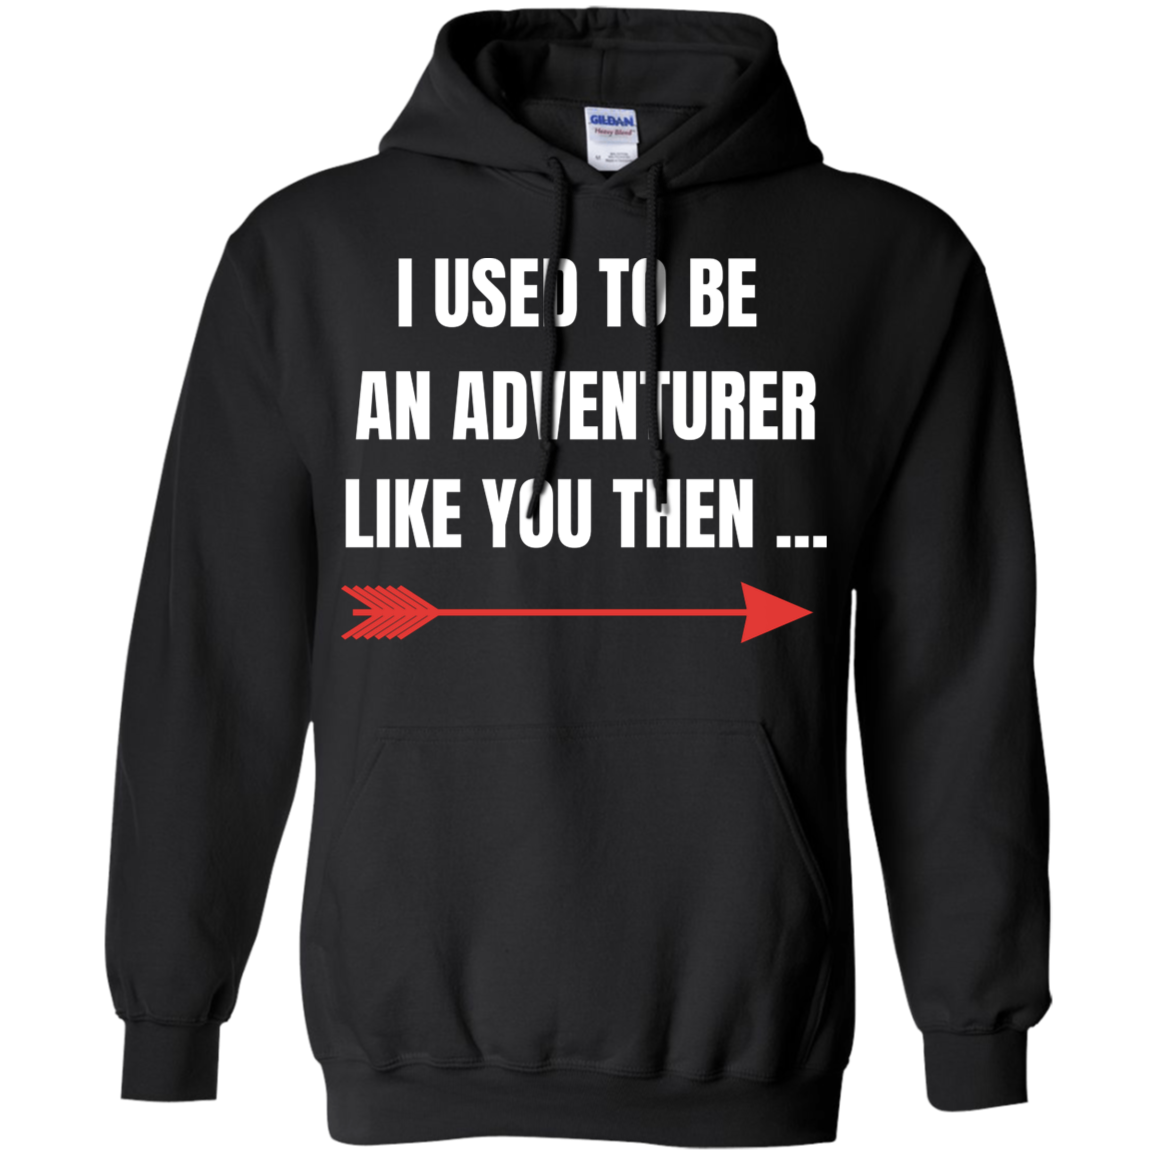 I Used To Be An Adventurer Like You Then... Fantasy RPG Video Gamer Pullover Hoodie 8 oz.